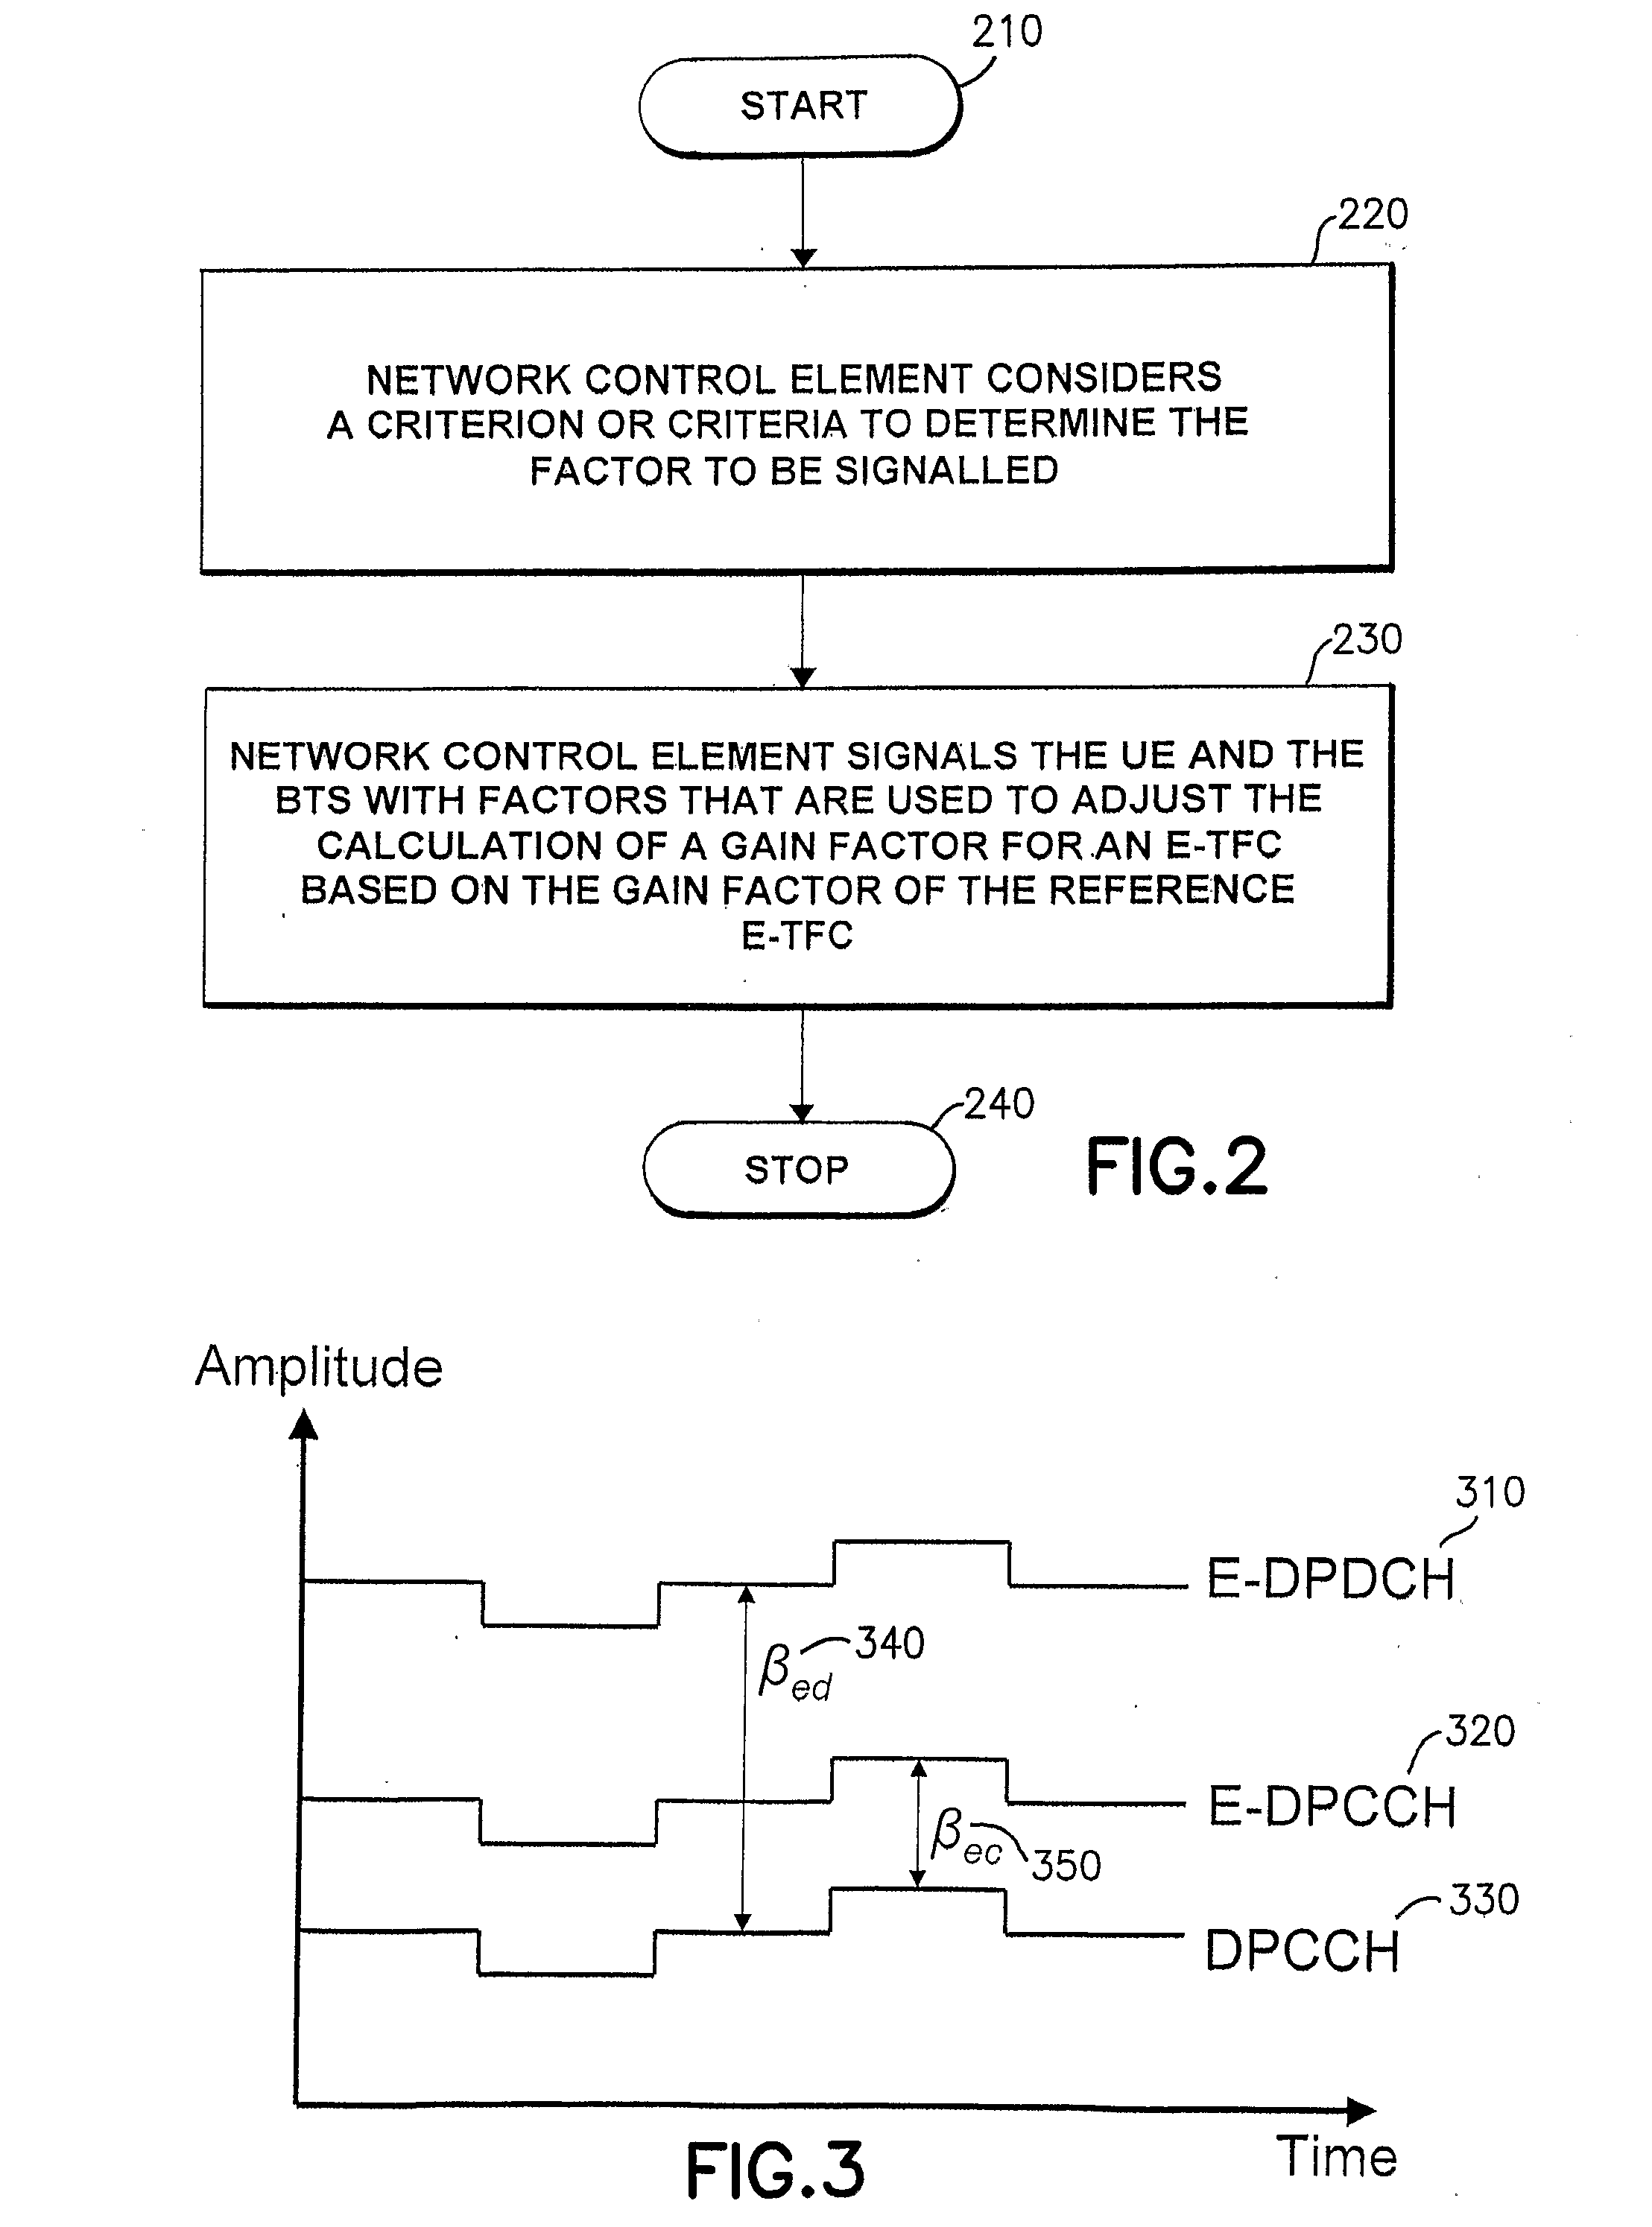 Apparatus, Method and Computer Program Product Providing Uplink Gain Factor for High Speed Uplink Packet Access